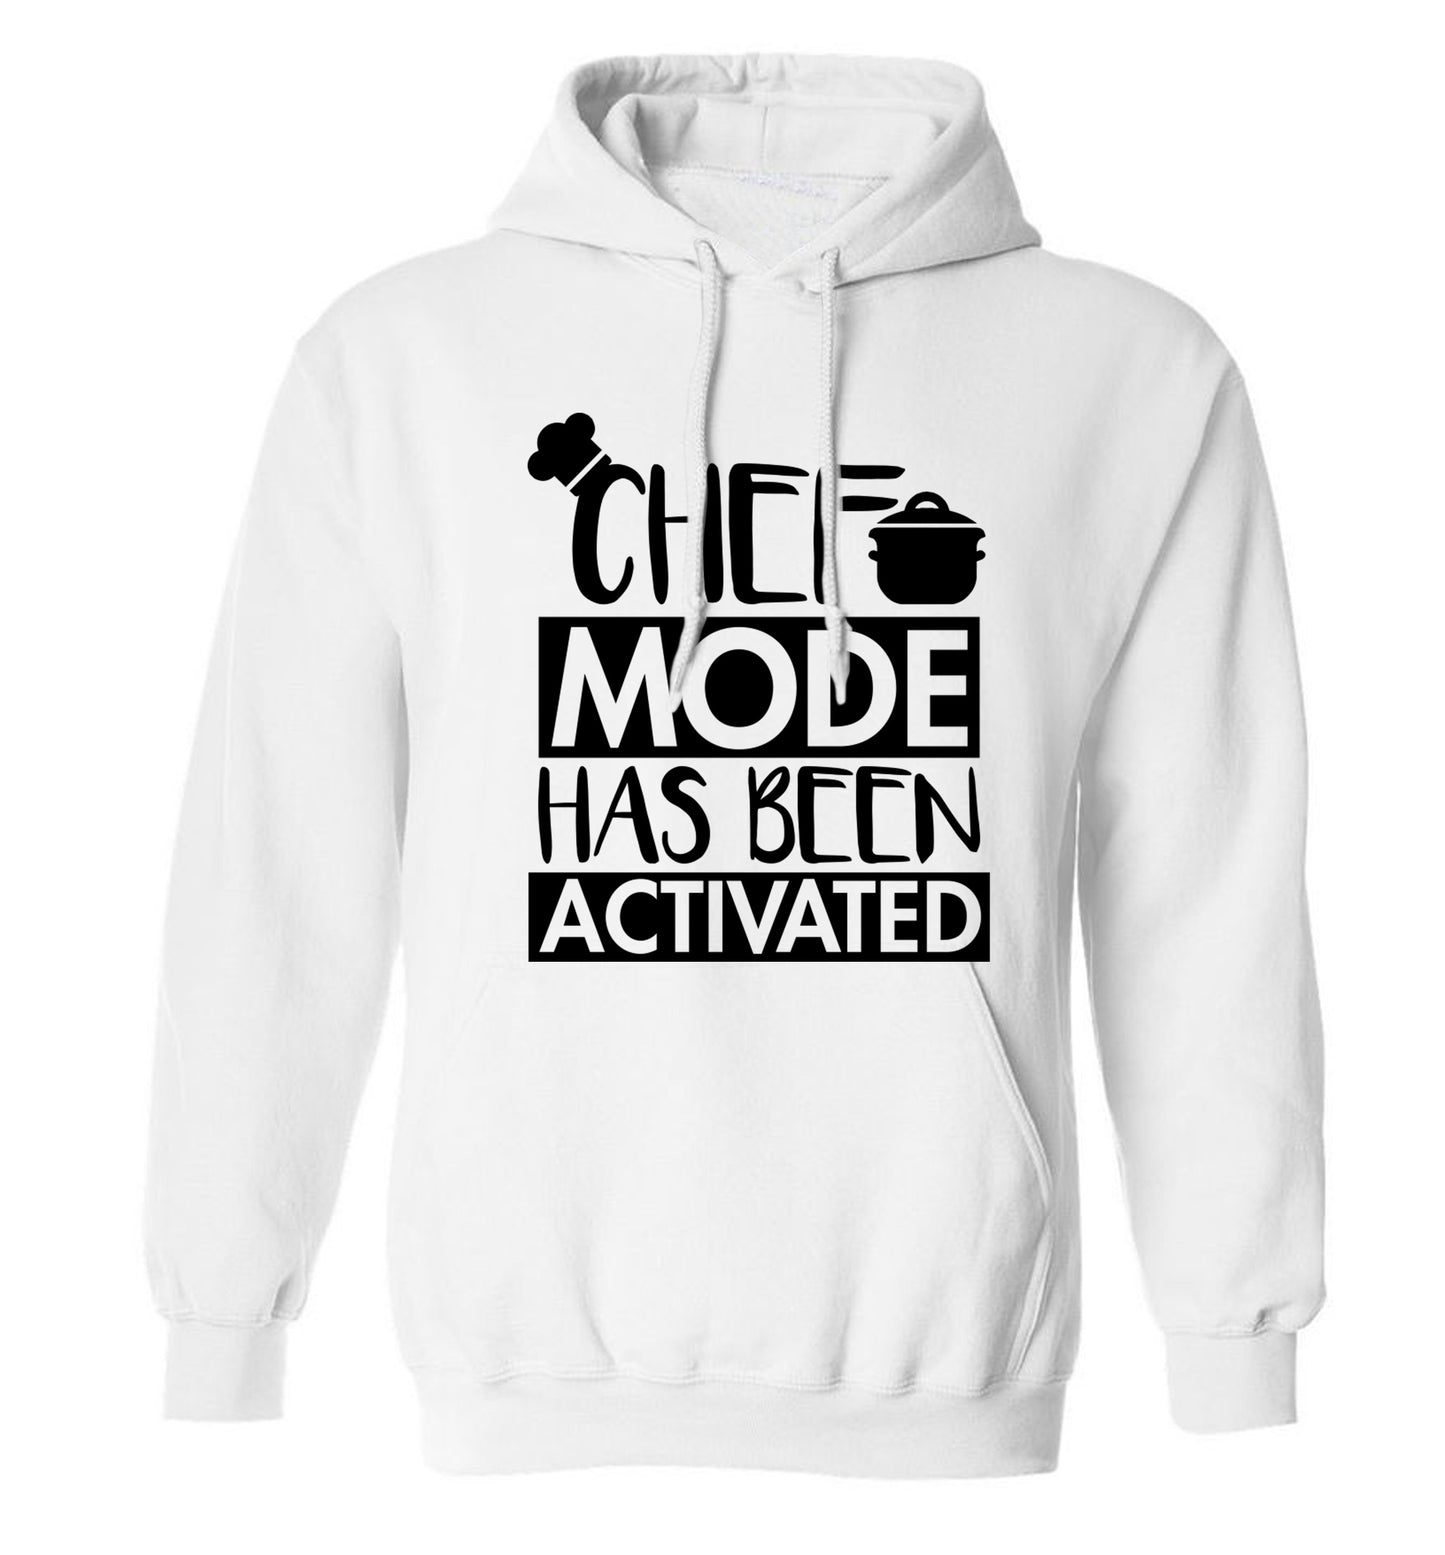 Chef mode has been activated adults unisex white hoodie 2XL